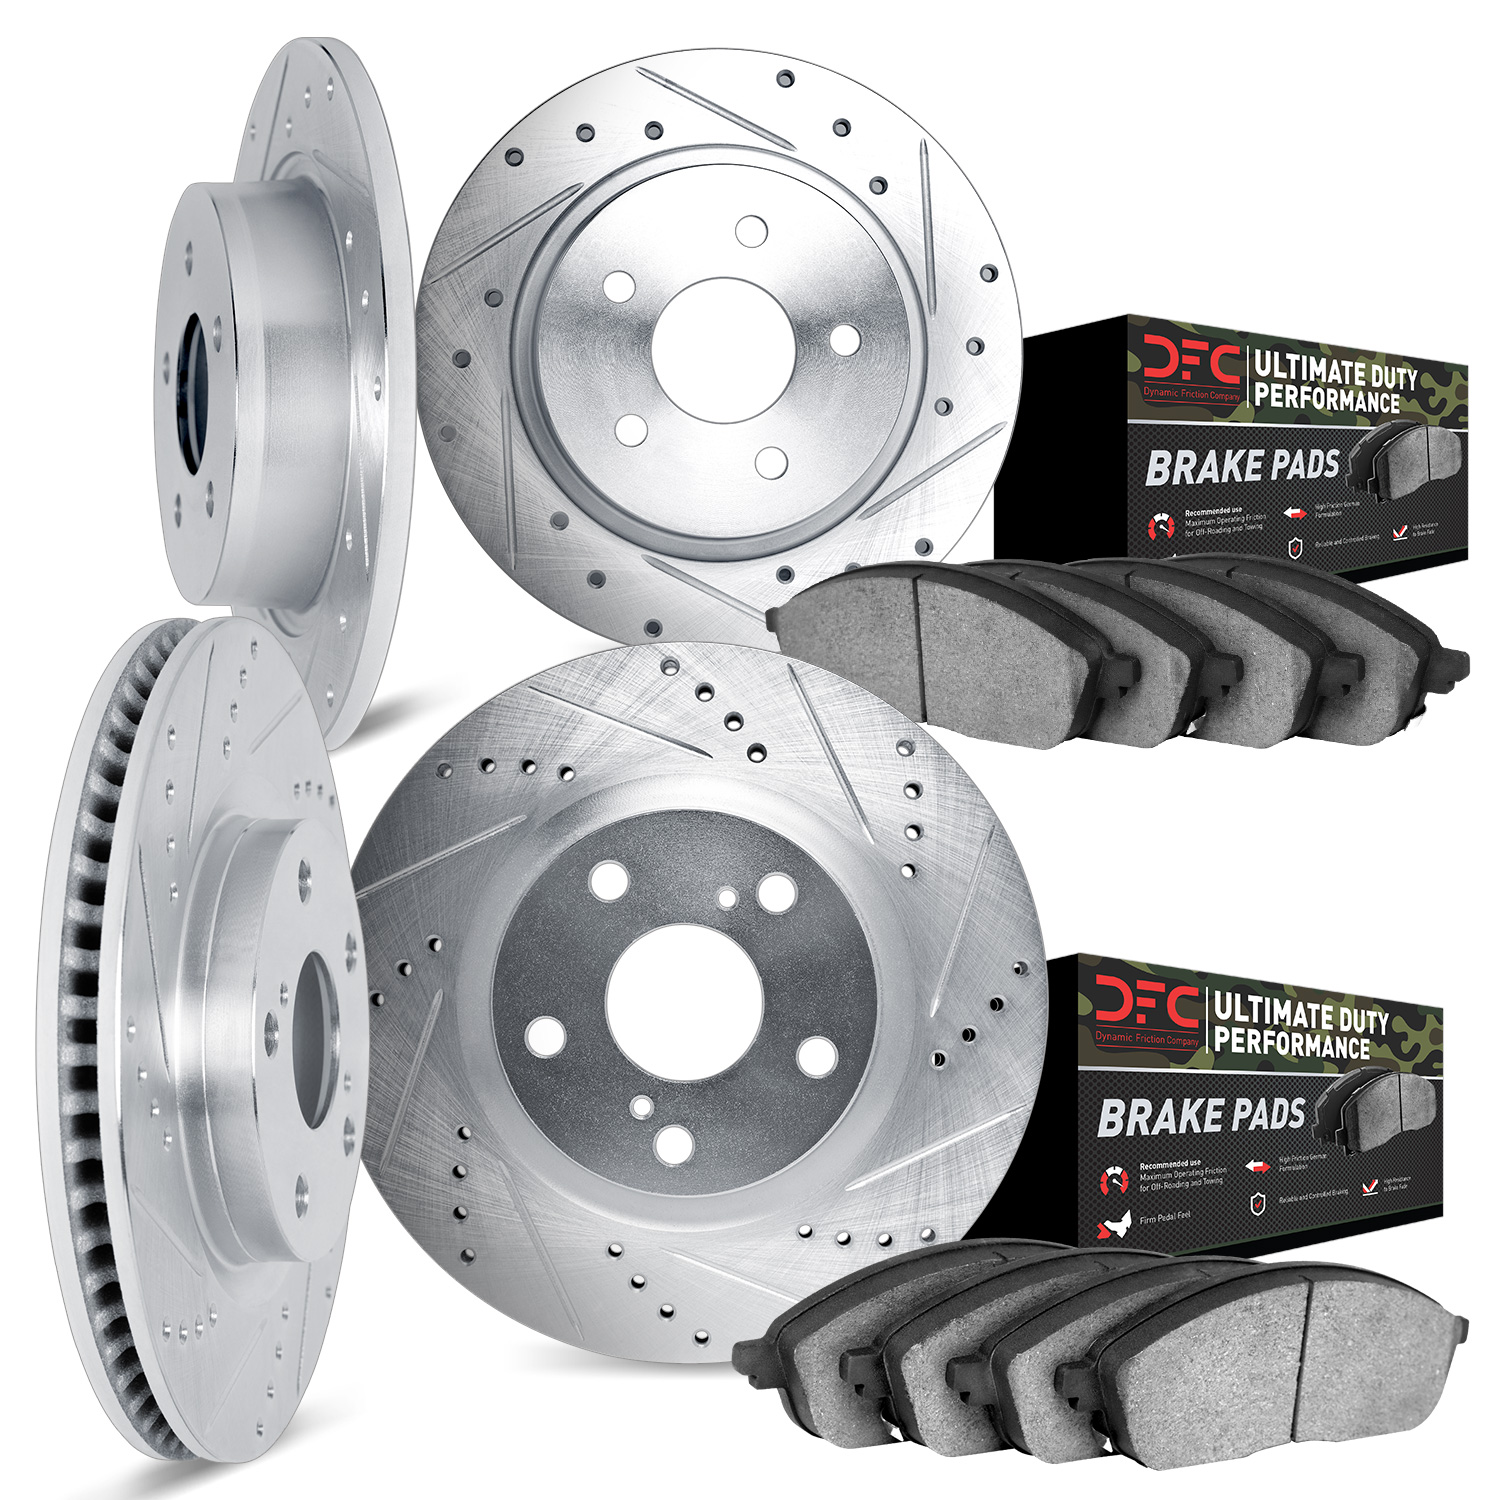 7404-42015 Drilled/Slotted Brake Rotors with Ultimate-Duty Brake Pads Kit [Silver], 2003-2006 Mopar, Position: Front and Rear